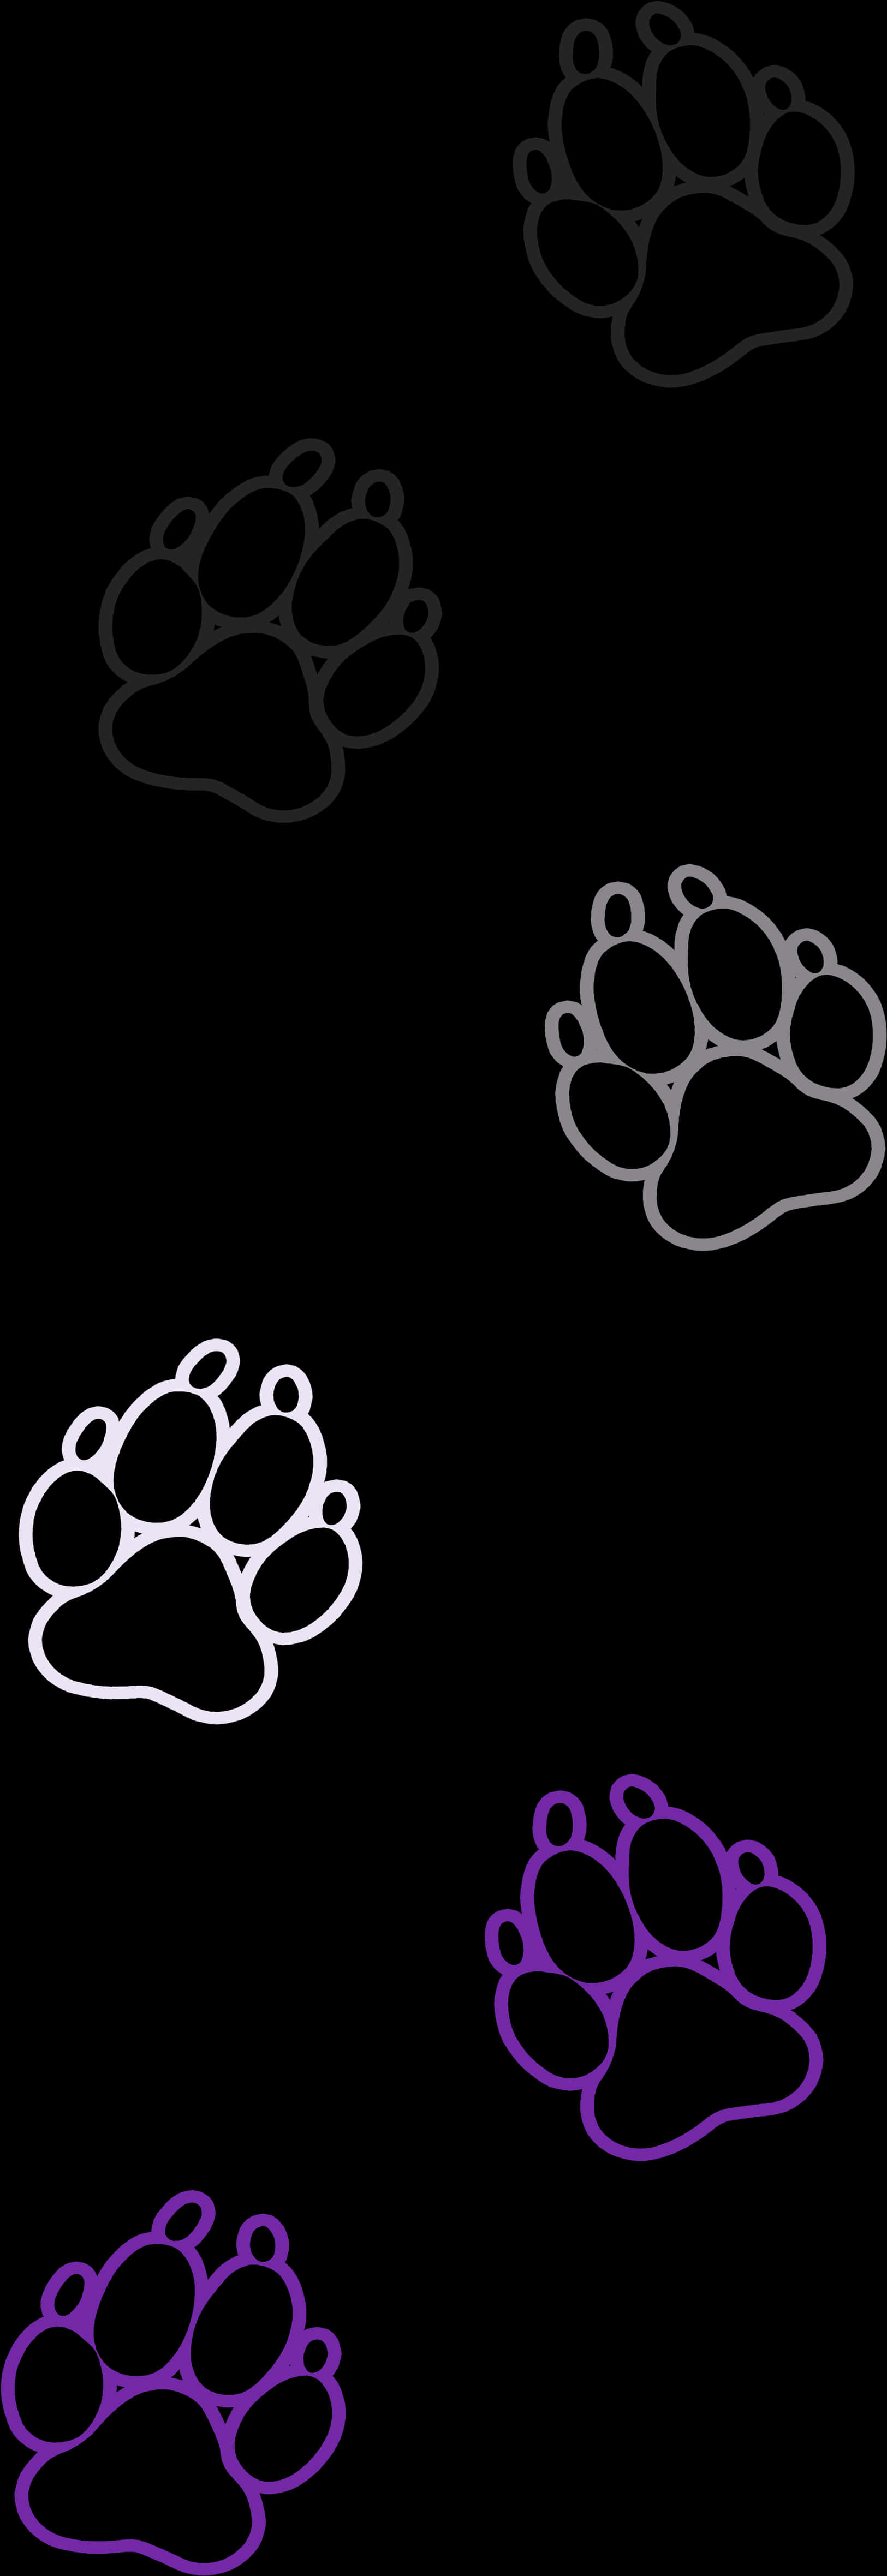 Neon Glow Dog Paws Vertical